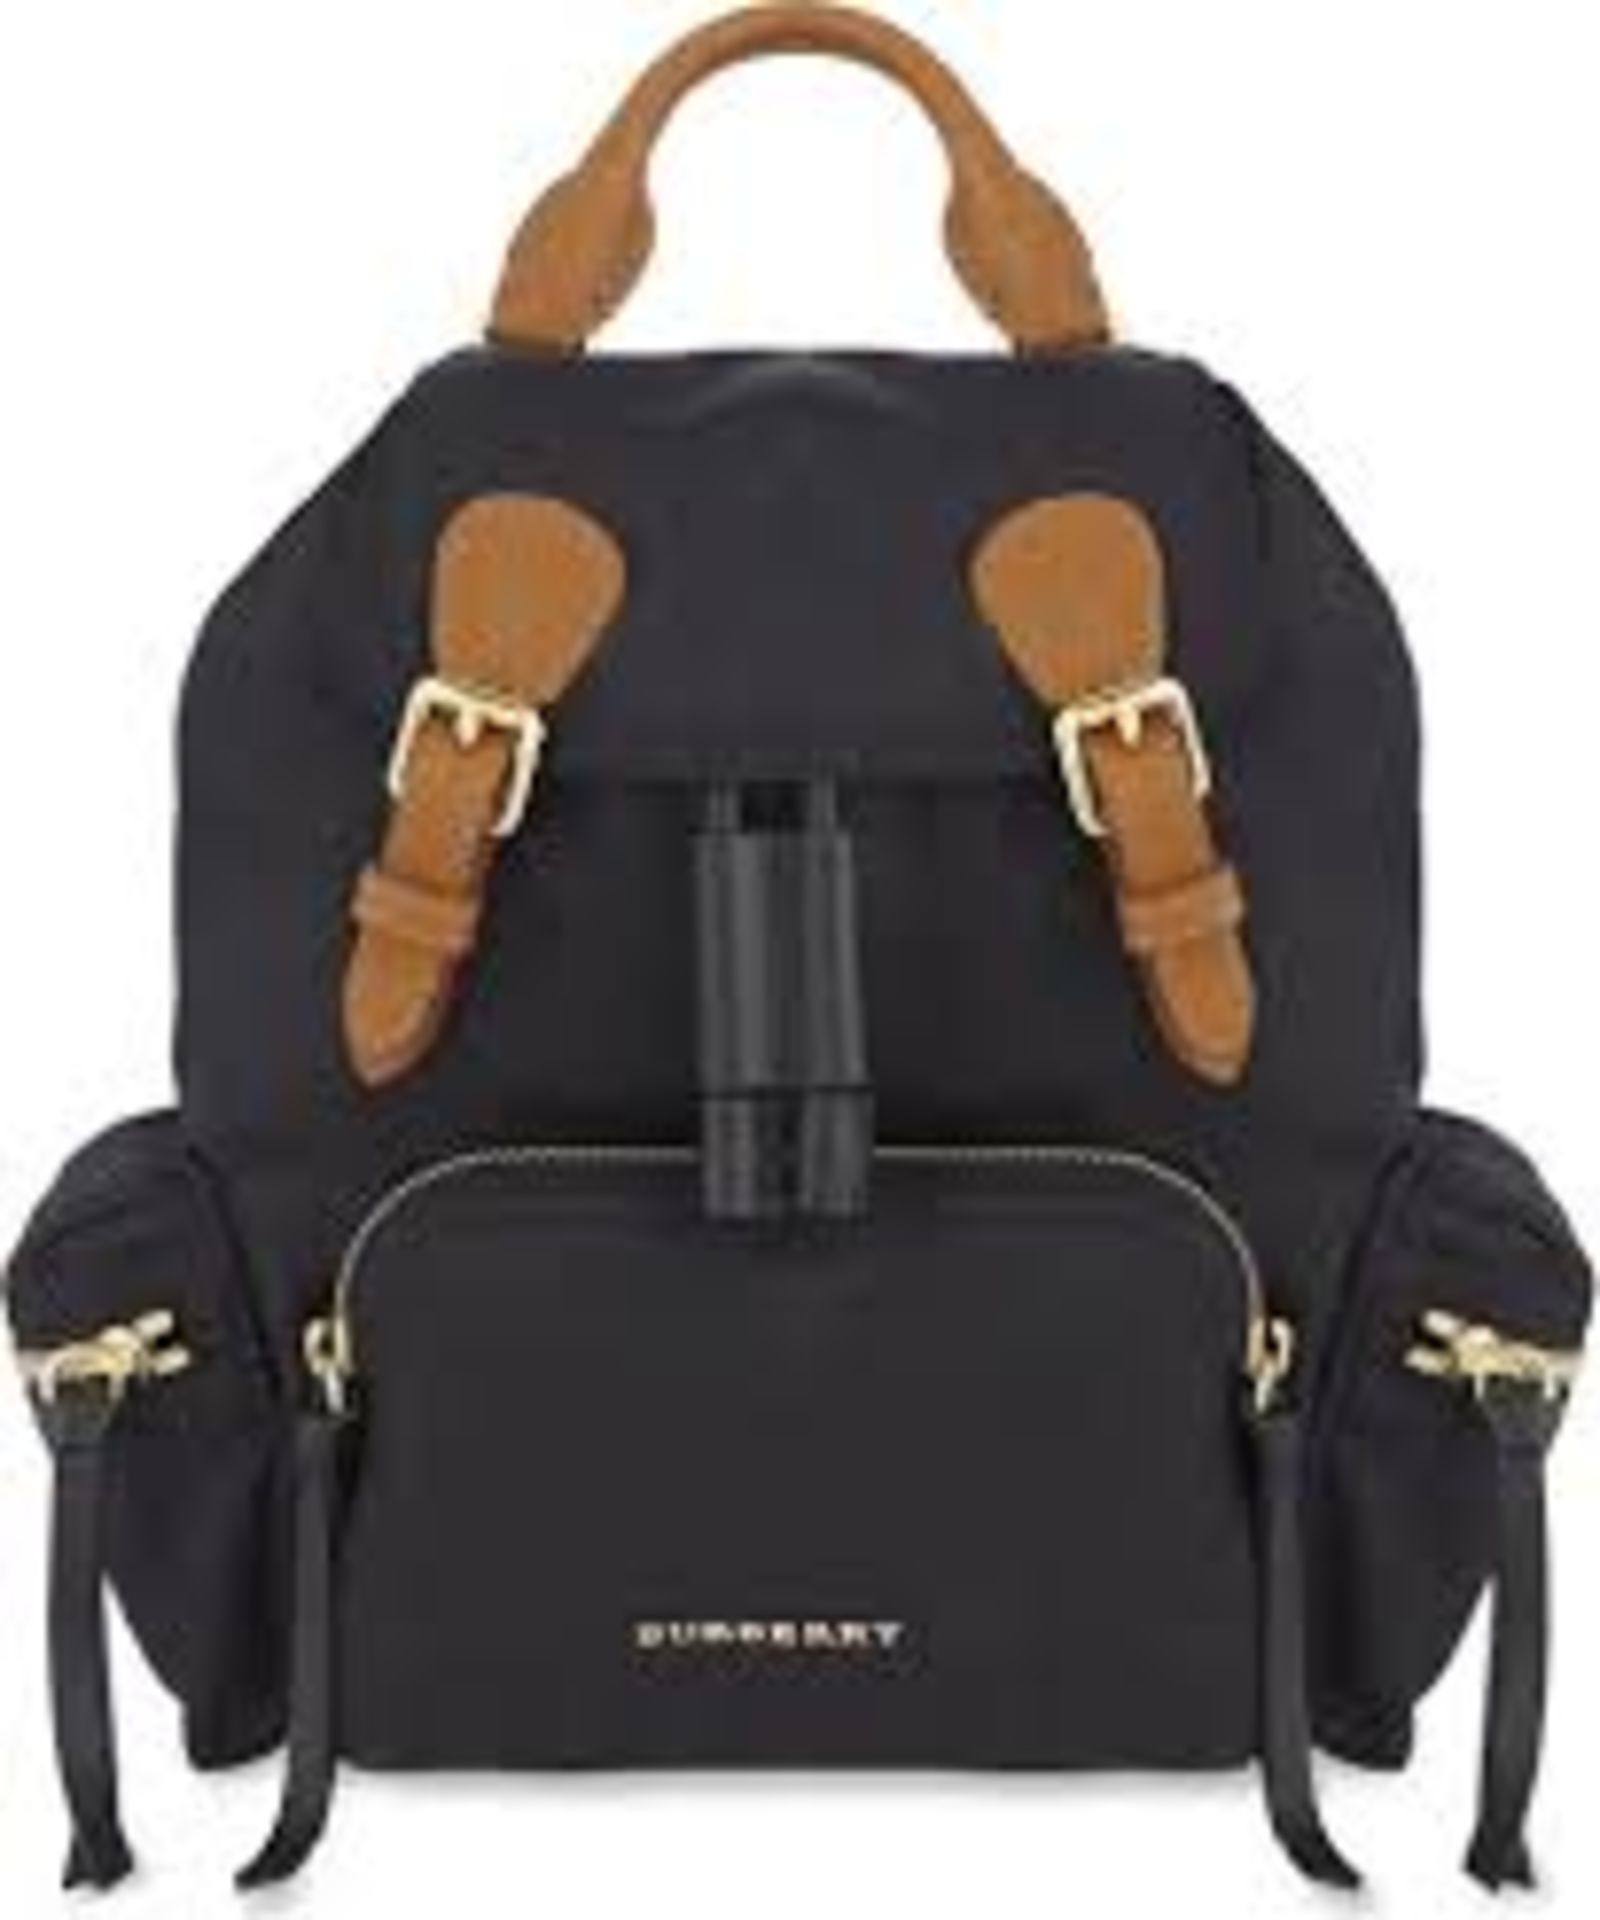 BURBERRY black nylon backpack. Personalised ZYL. 35x35cm - Image 2 of 11